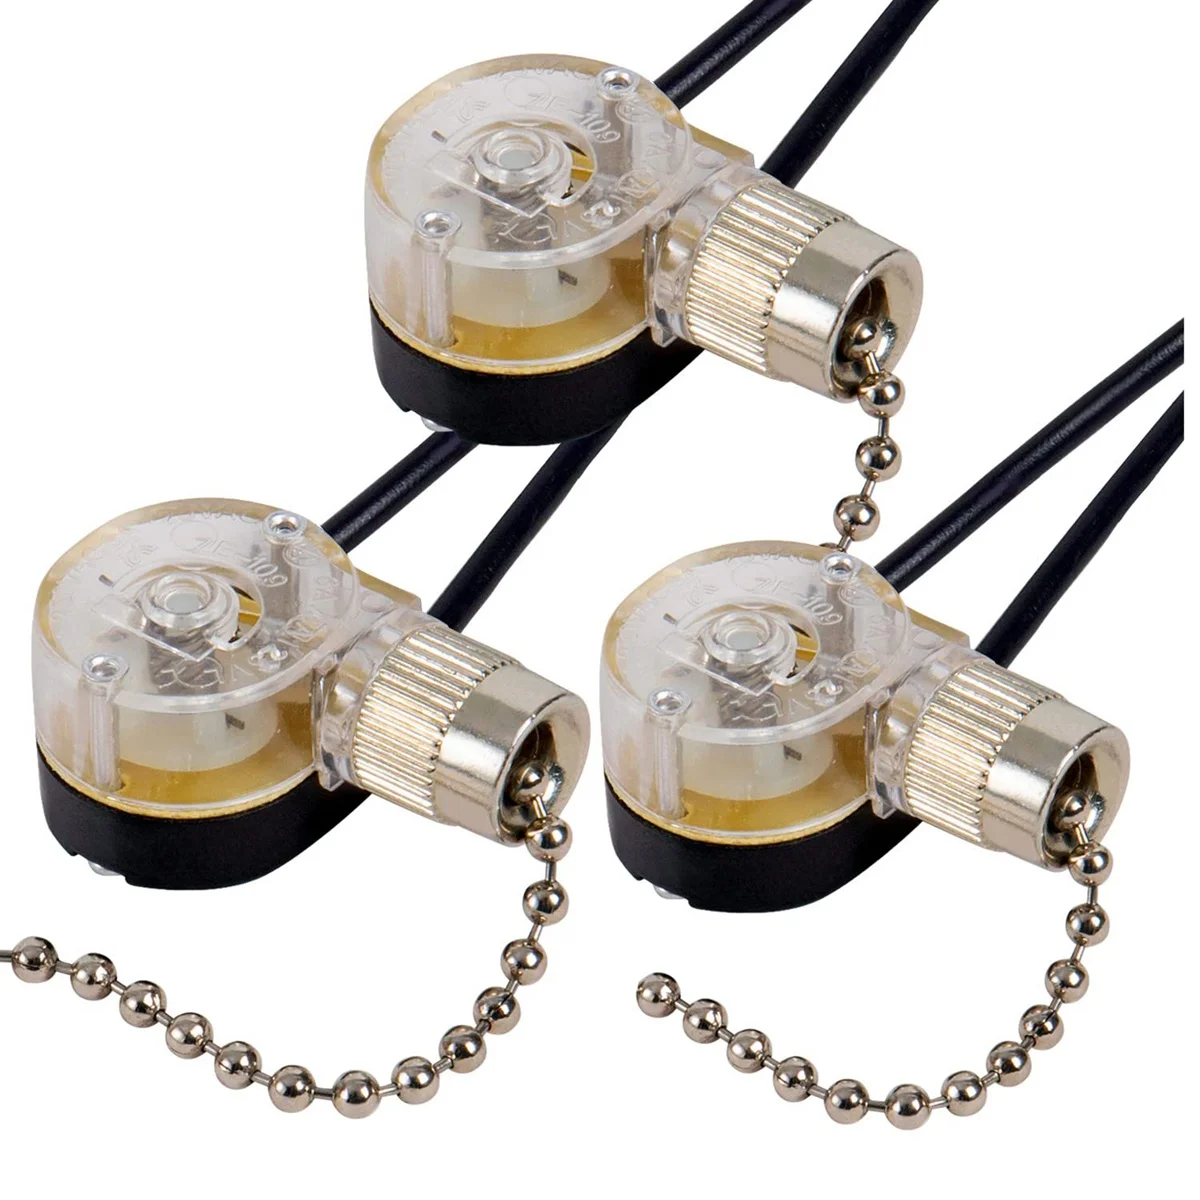 

3Pack Ceiling Fan Light Switch ZE-109 Fan Switch Ceiling Pull Chain Switch Replacement (Nickel)